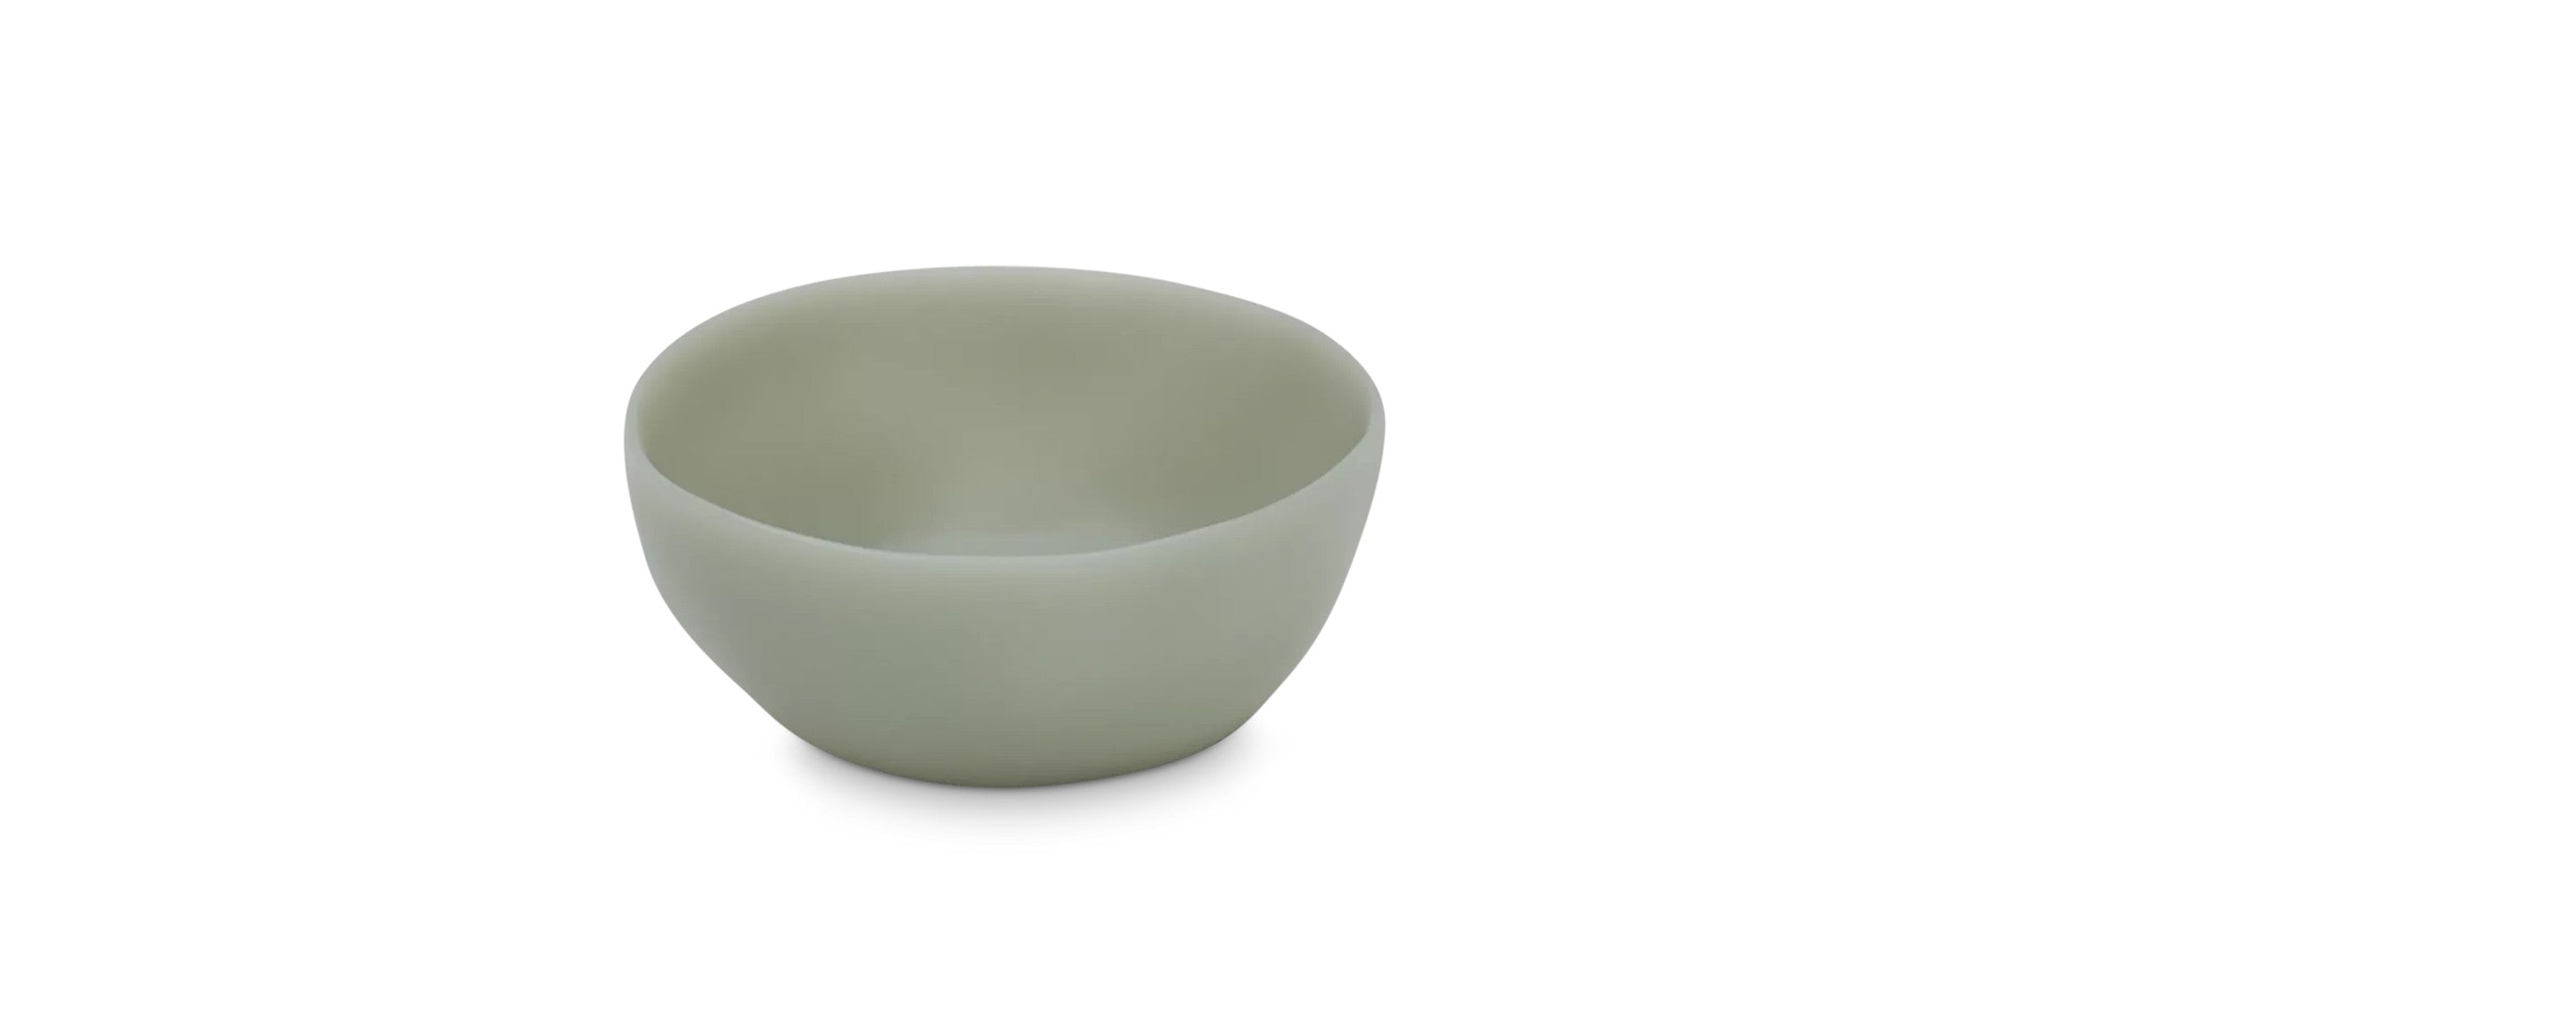 resin purist petite bowl collection by tina frey